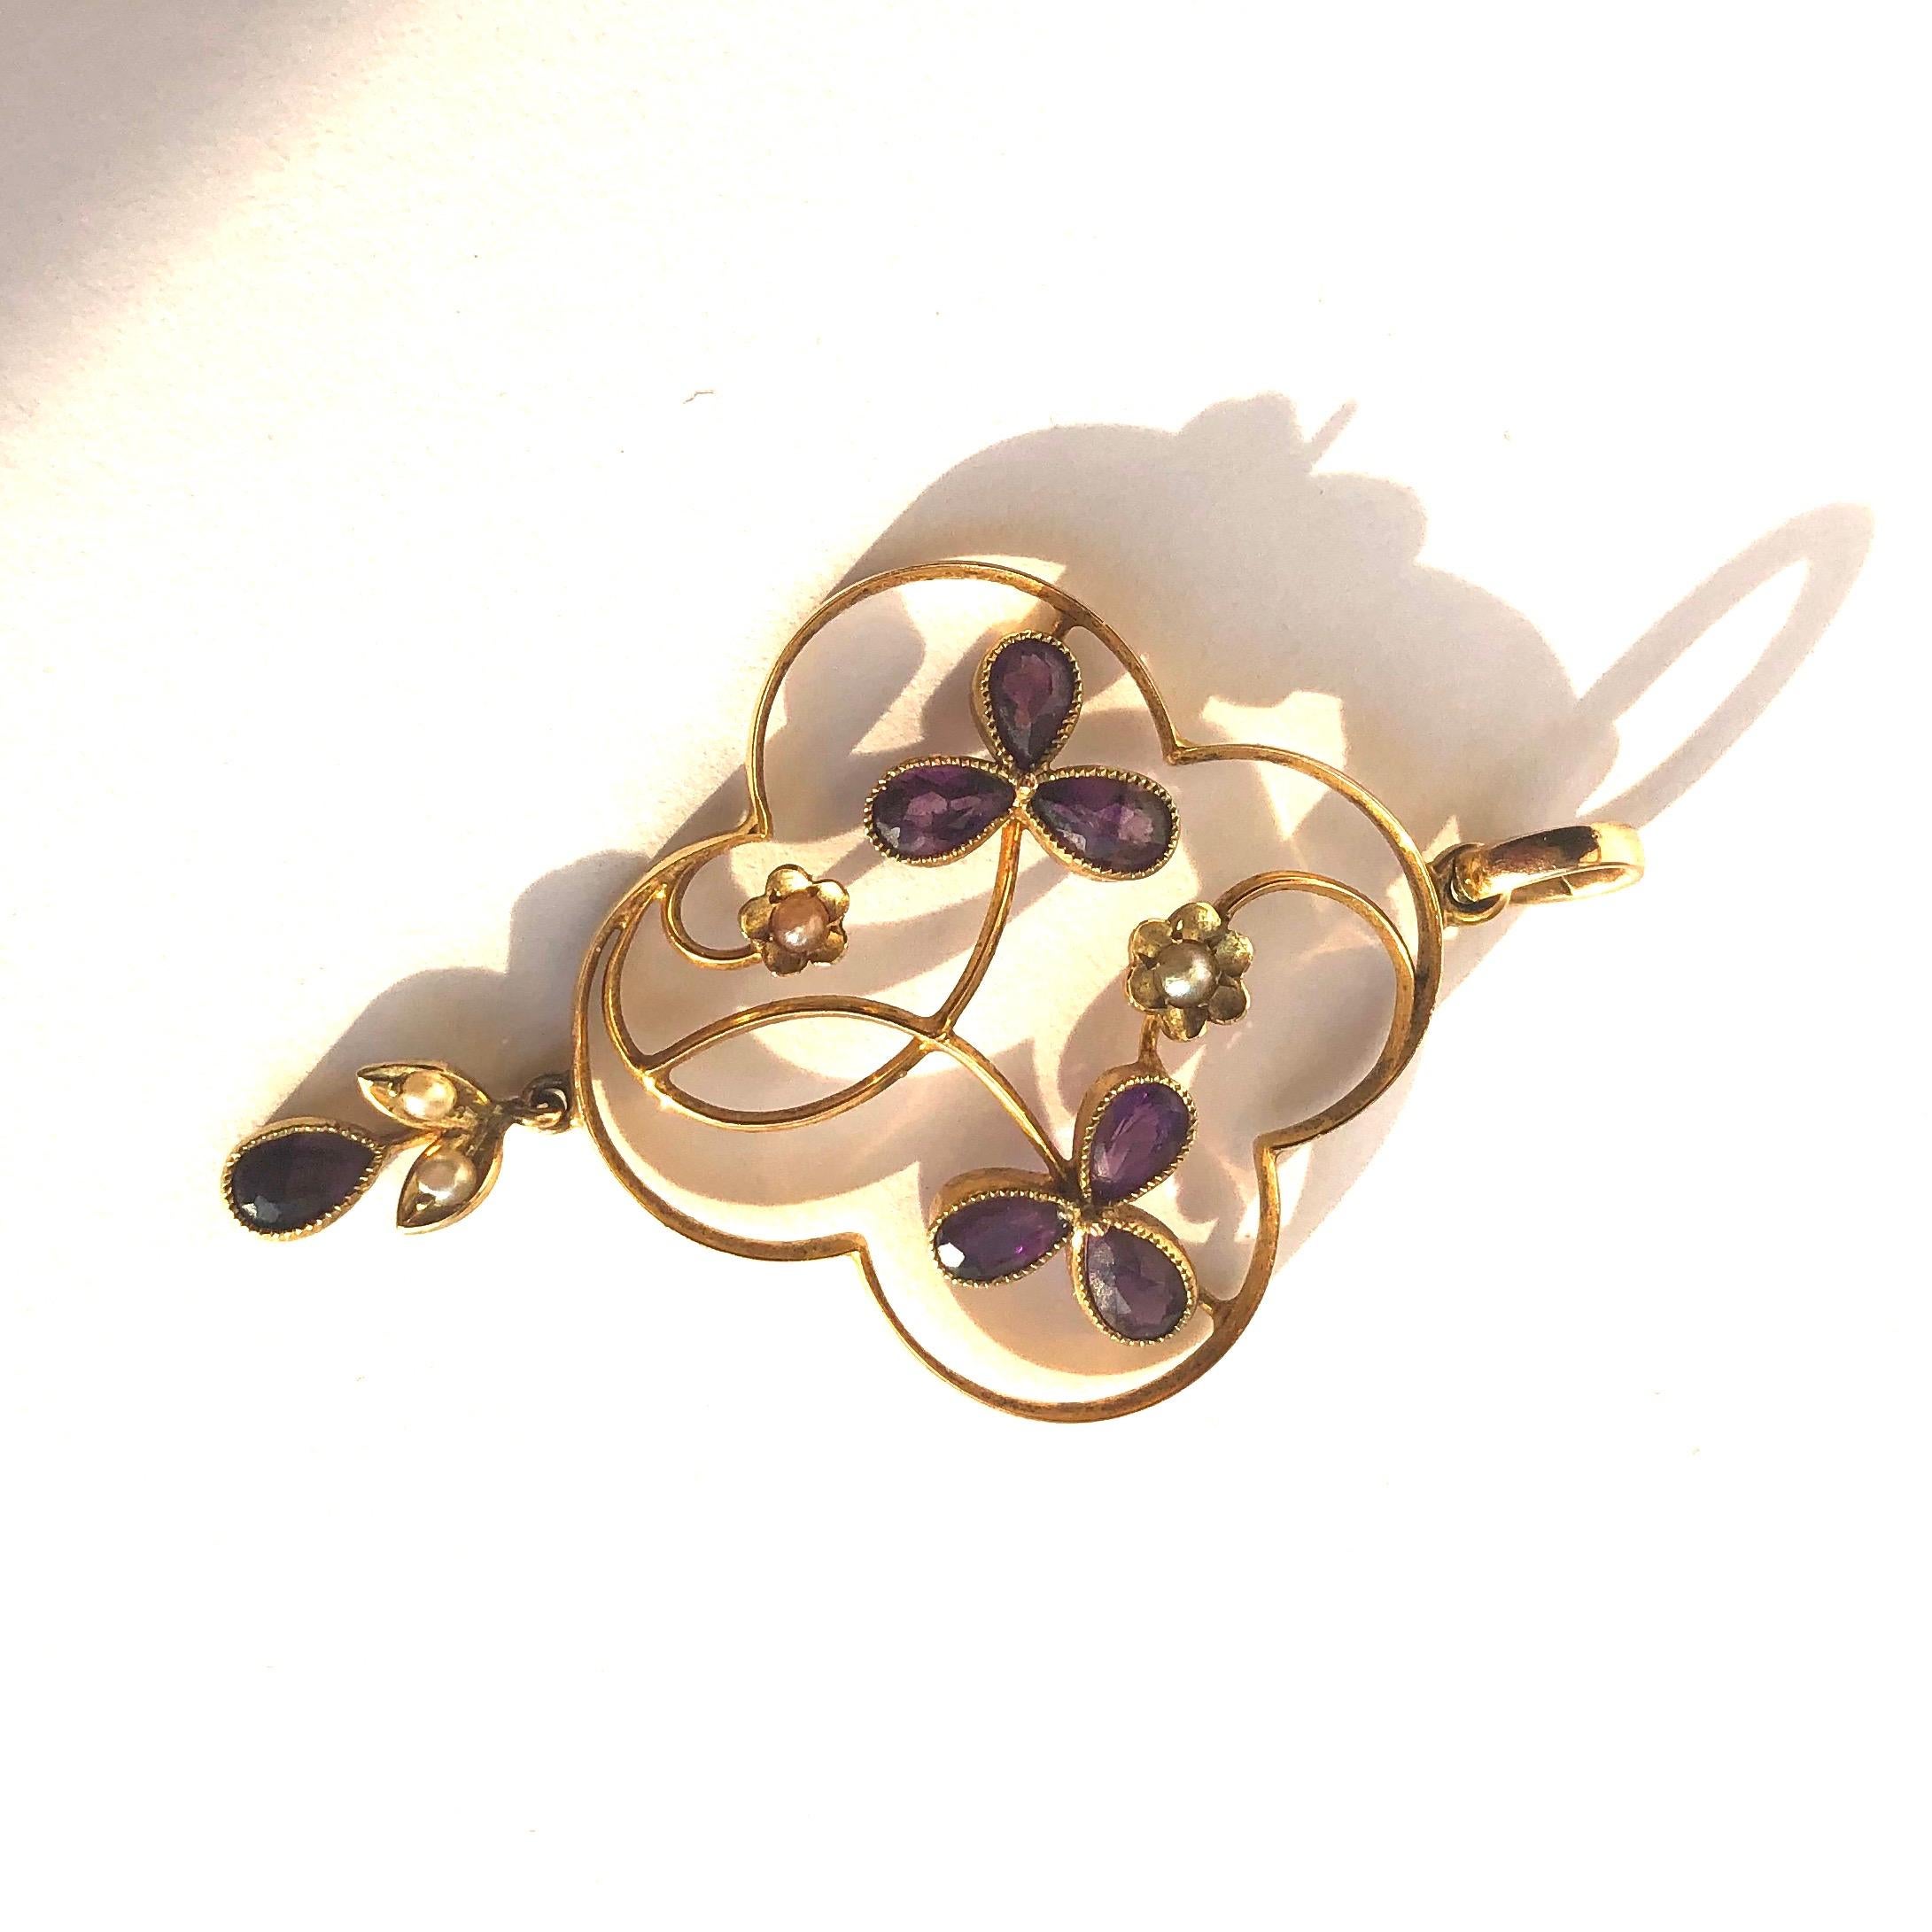 The style of this pendant is so delicate with the fine metal work and is beautifully decorated with pearls and amethyst. The central oval amethyst measures 30pts. The seed pearls surround the central stone on gold leaves and the loop even holds a